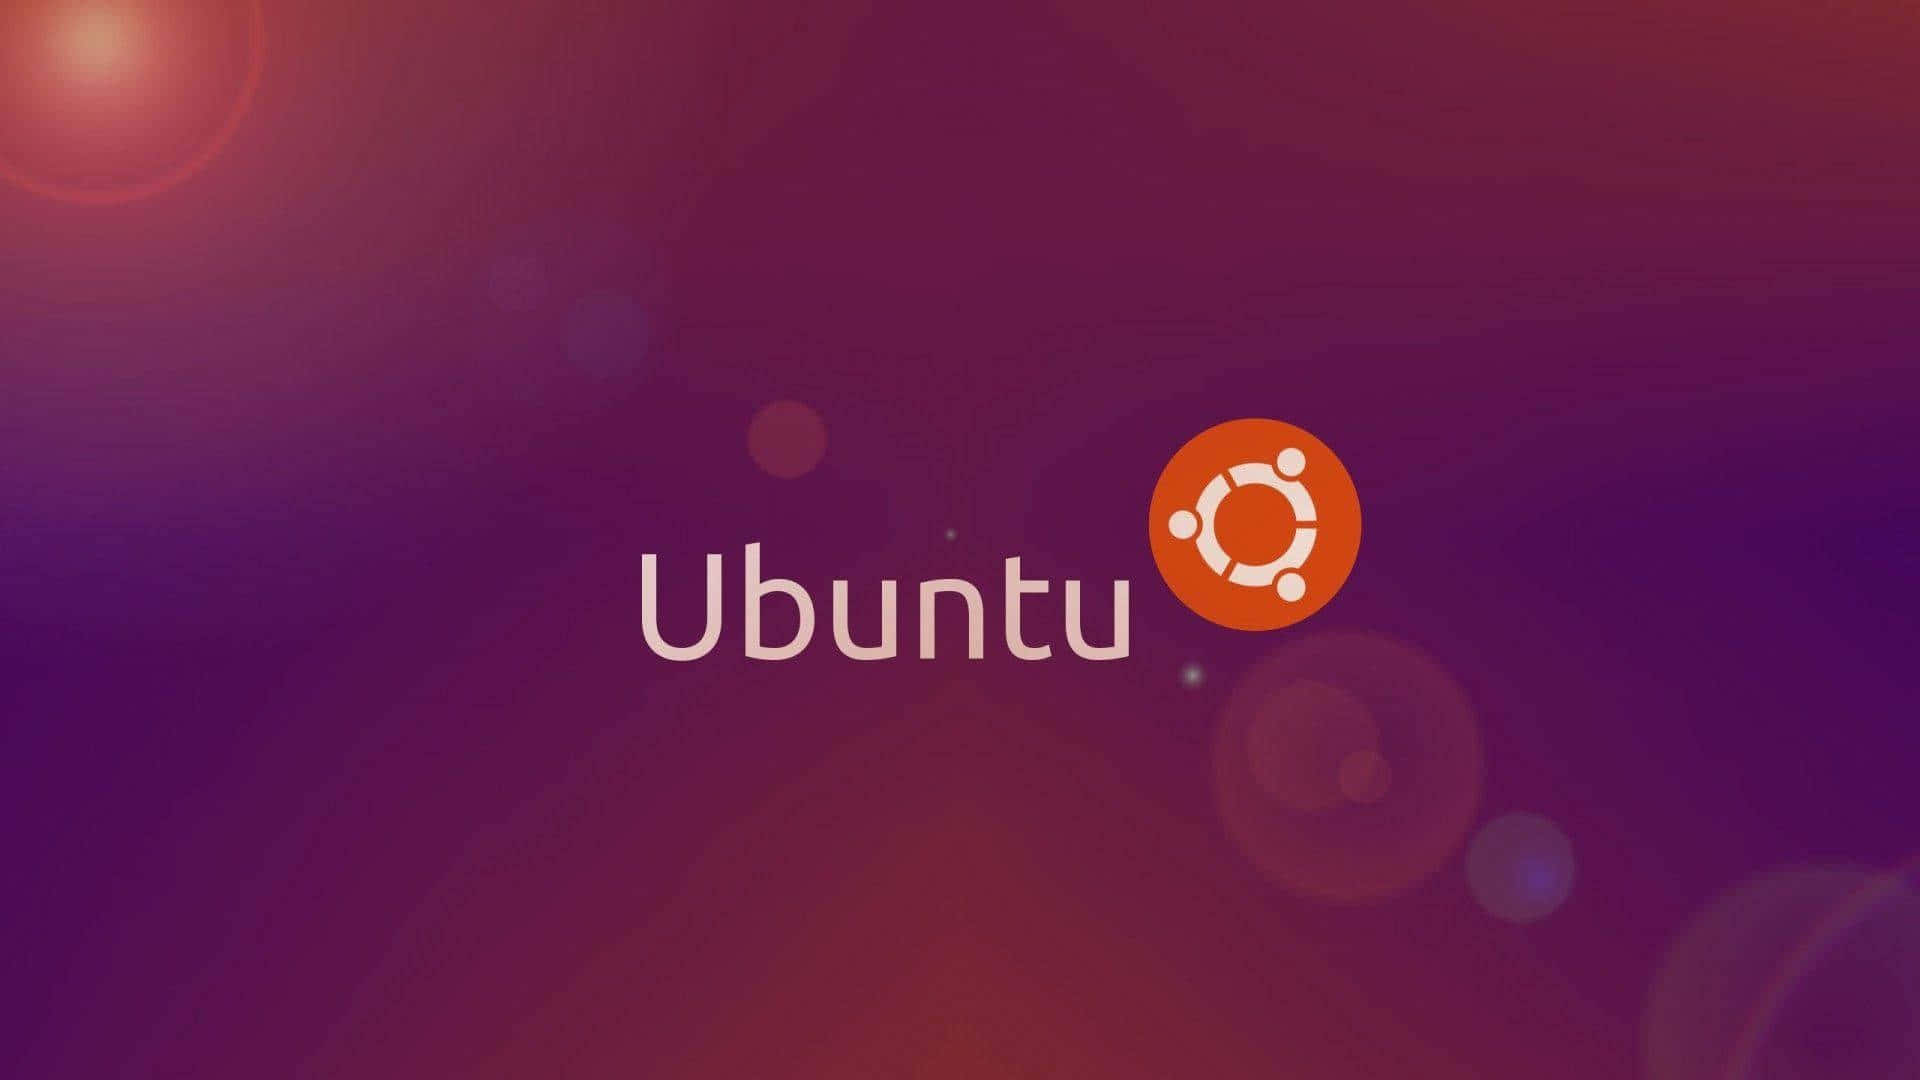 Ubuntu: The Open Source Operating System for Everyone.